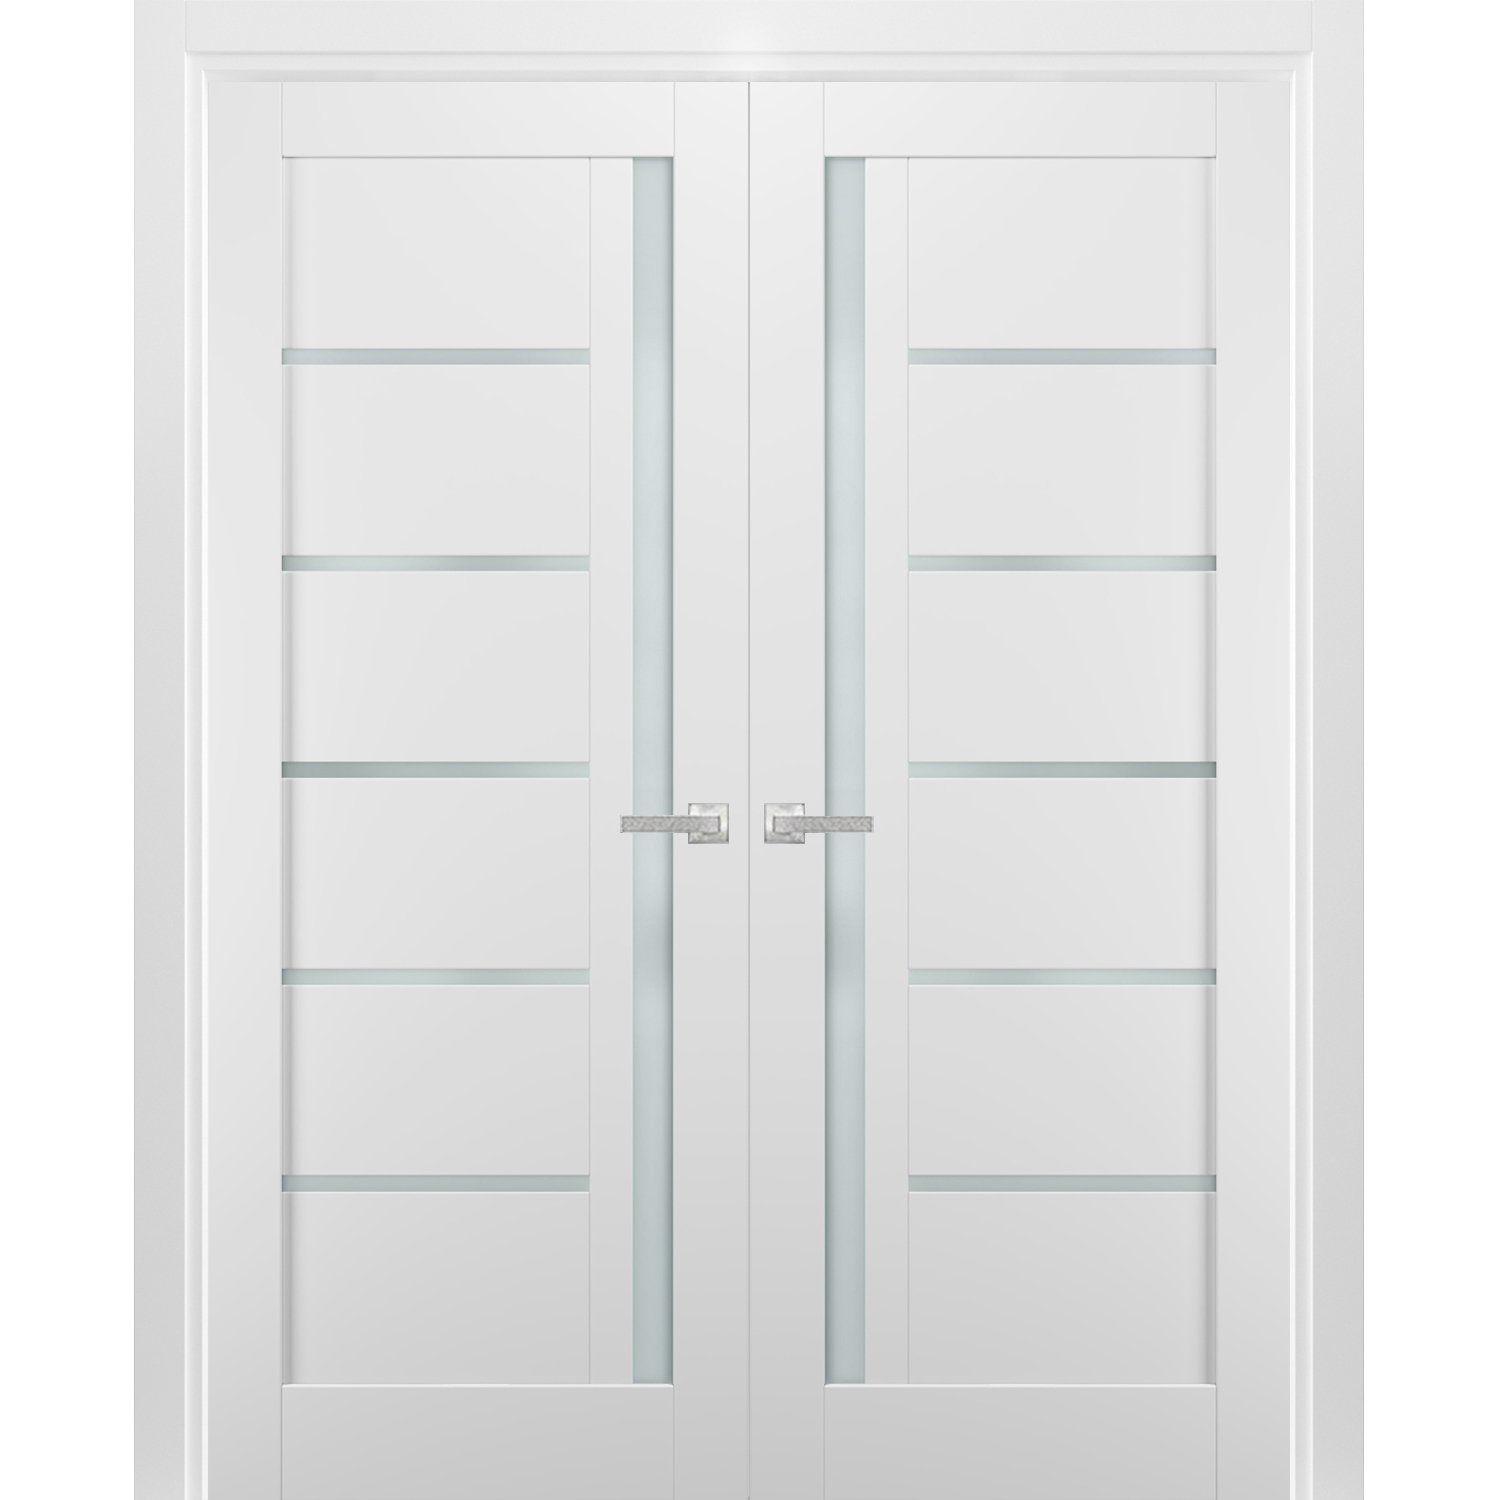 Solid French Double Doors | Quadro 4588 White Silk with Black Glass | Wood Solid Panel Frame Trims |